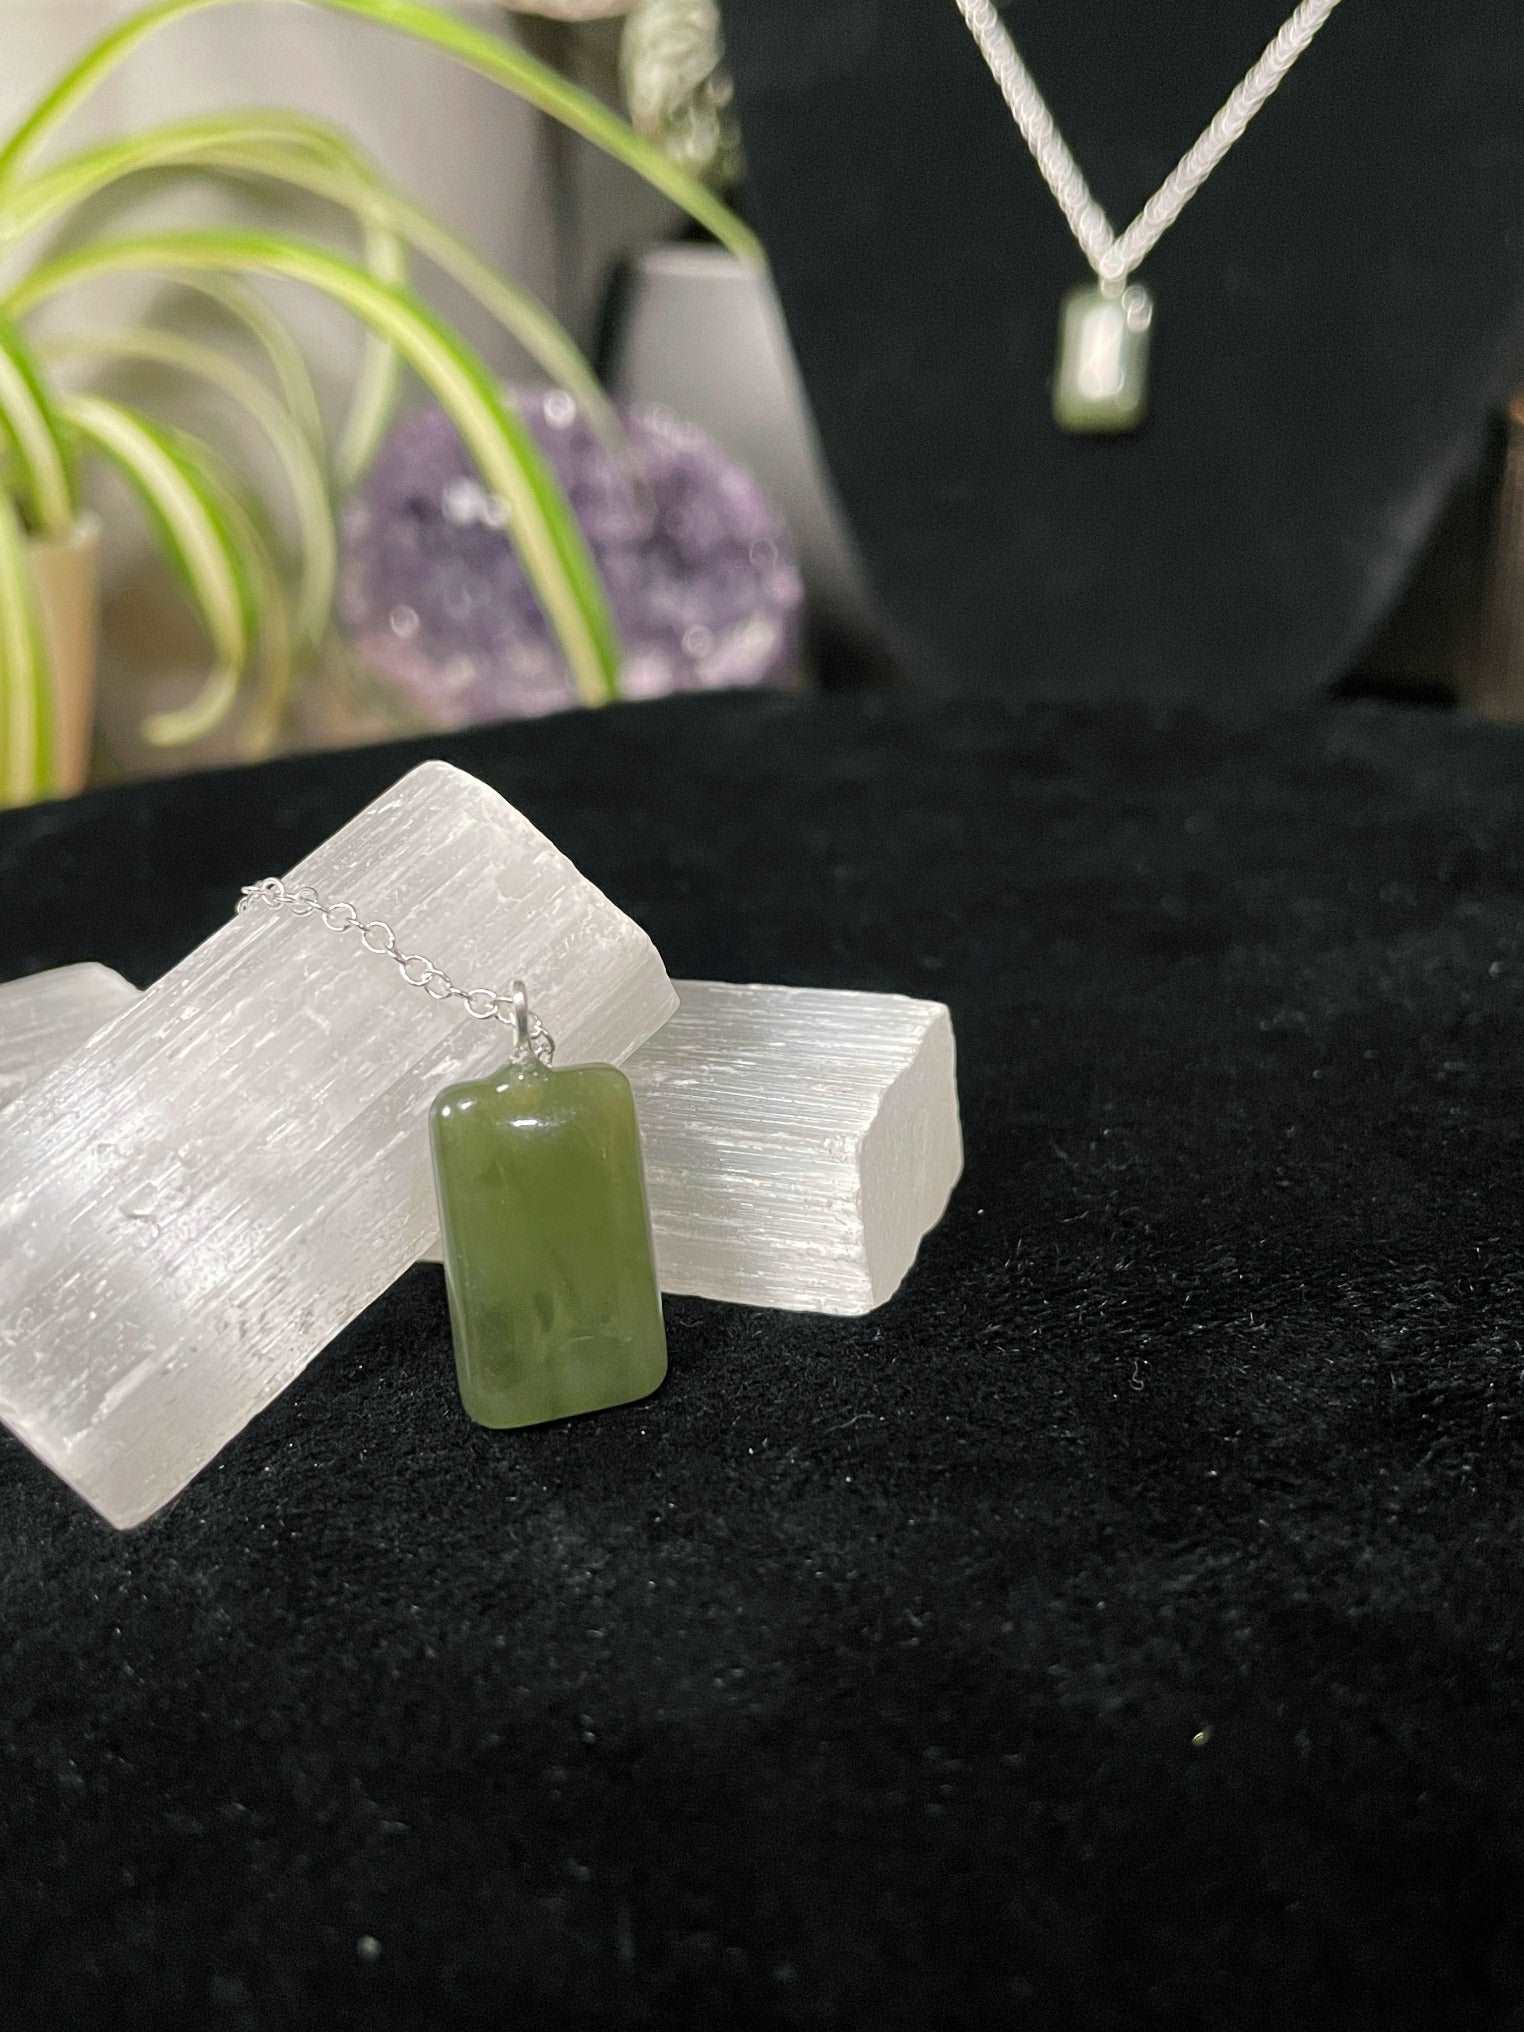 An image of a green nephrite jade rectangle shaped pendant on a necklace. It sits atop some selenite chunks and a black velvet surface.